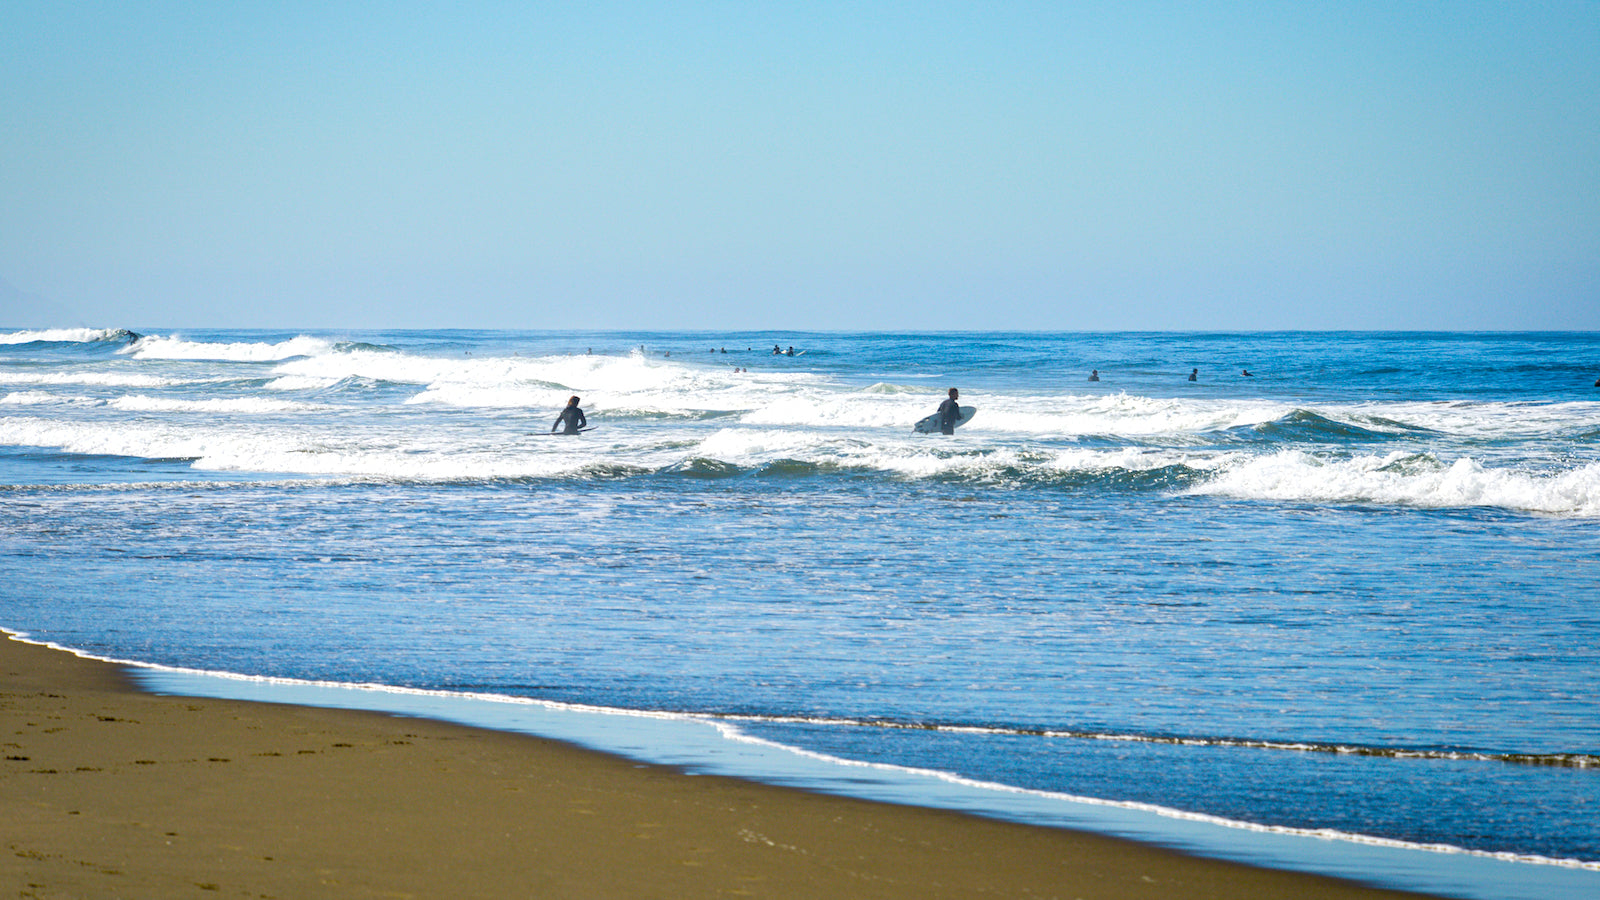 Surfers in the waves at San Francisco's Ocean Beach